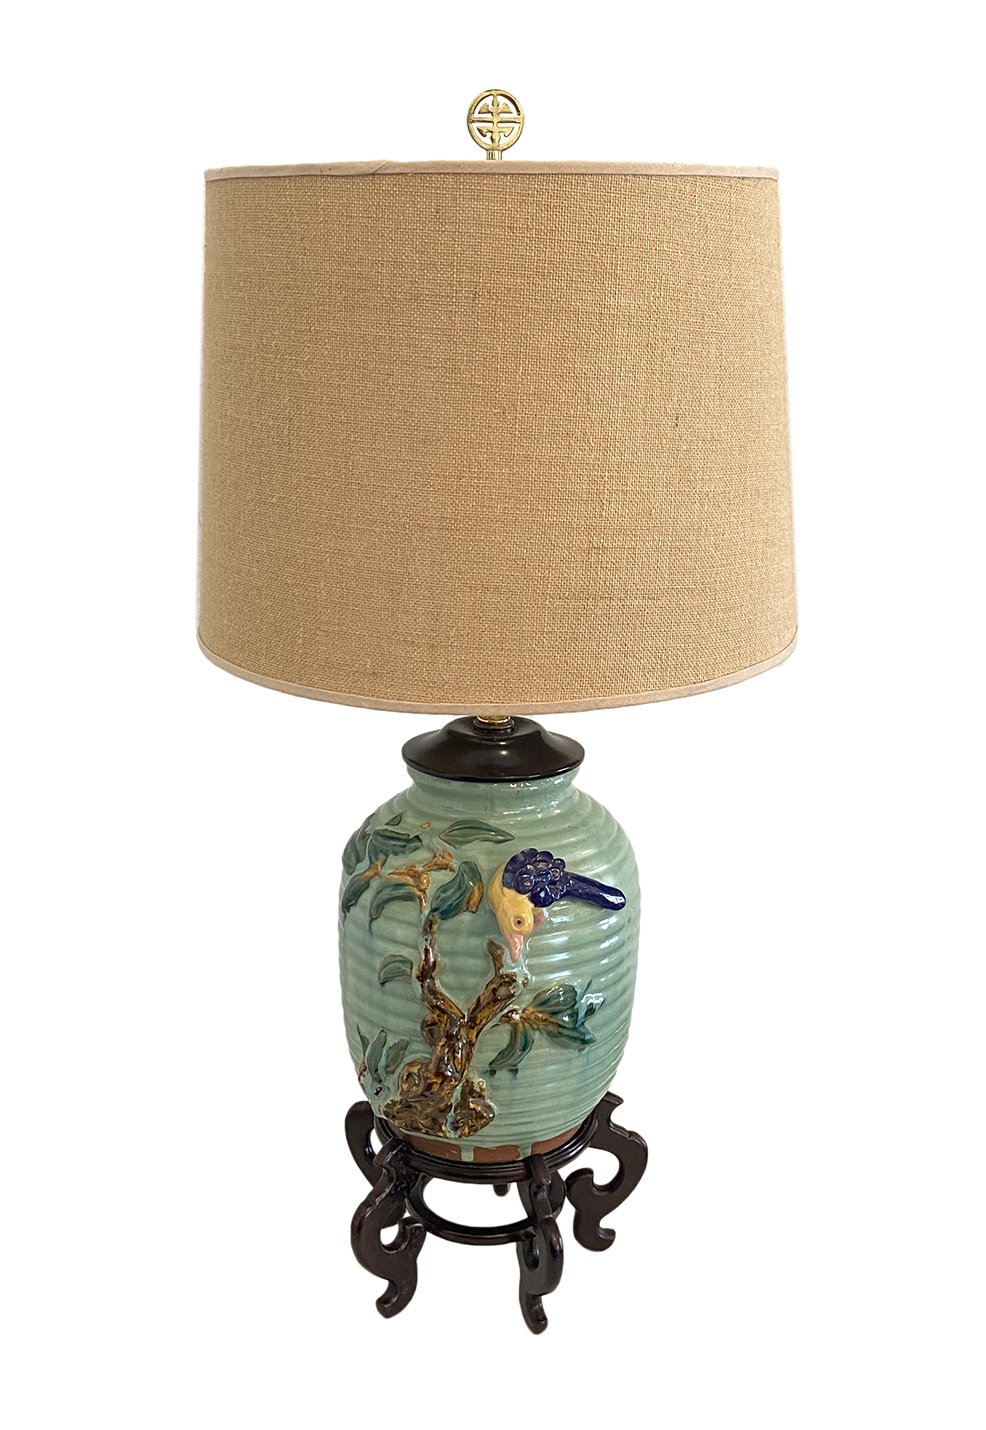 Chinoiserie lamp with bird: Sold